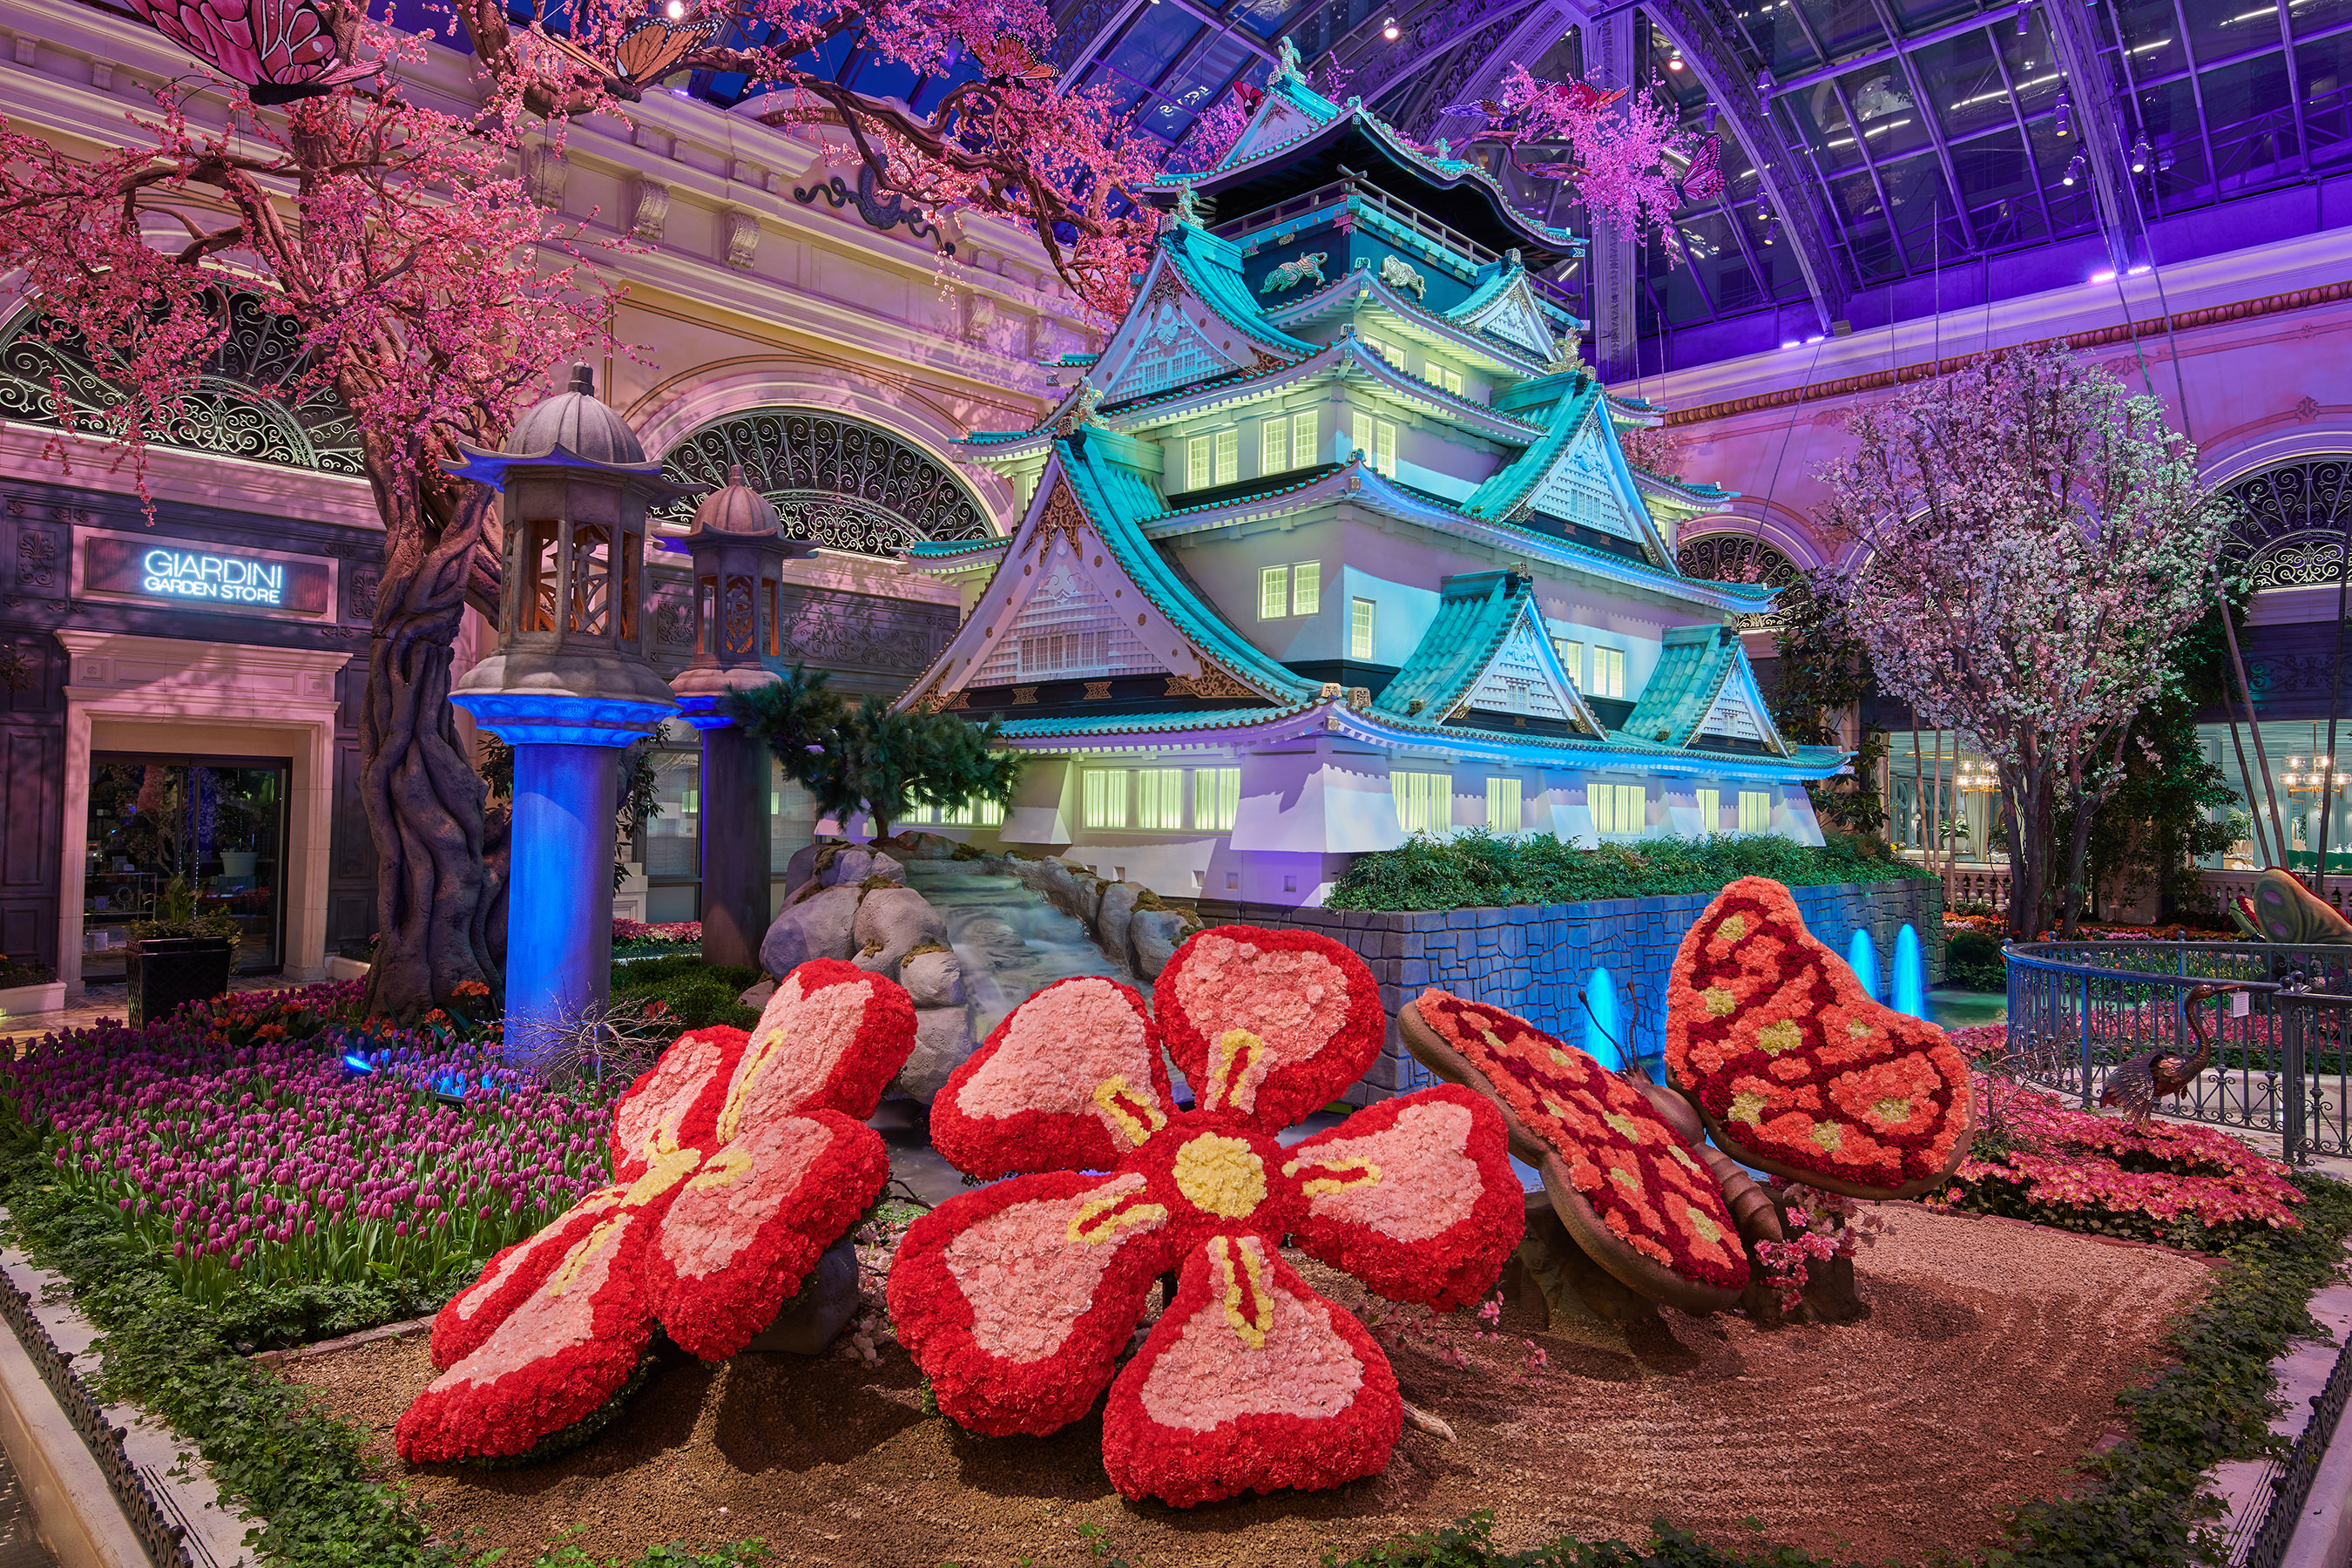 Bellagio’s Conservatory & Botanical Gardens in Las Vegas celebrates Japan with vibrant spring display through June 15, featuring replica of iconic Osaka Castle and 65,000 fresh flowers